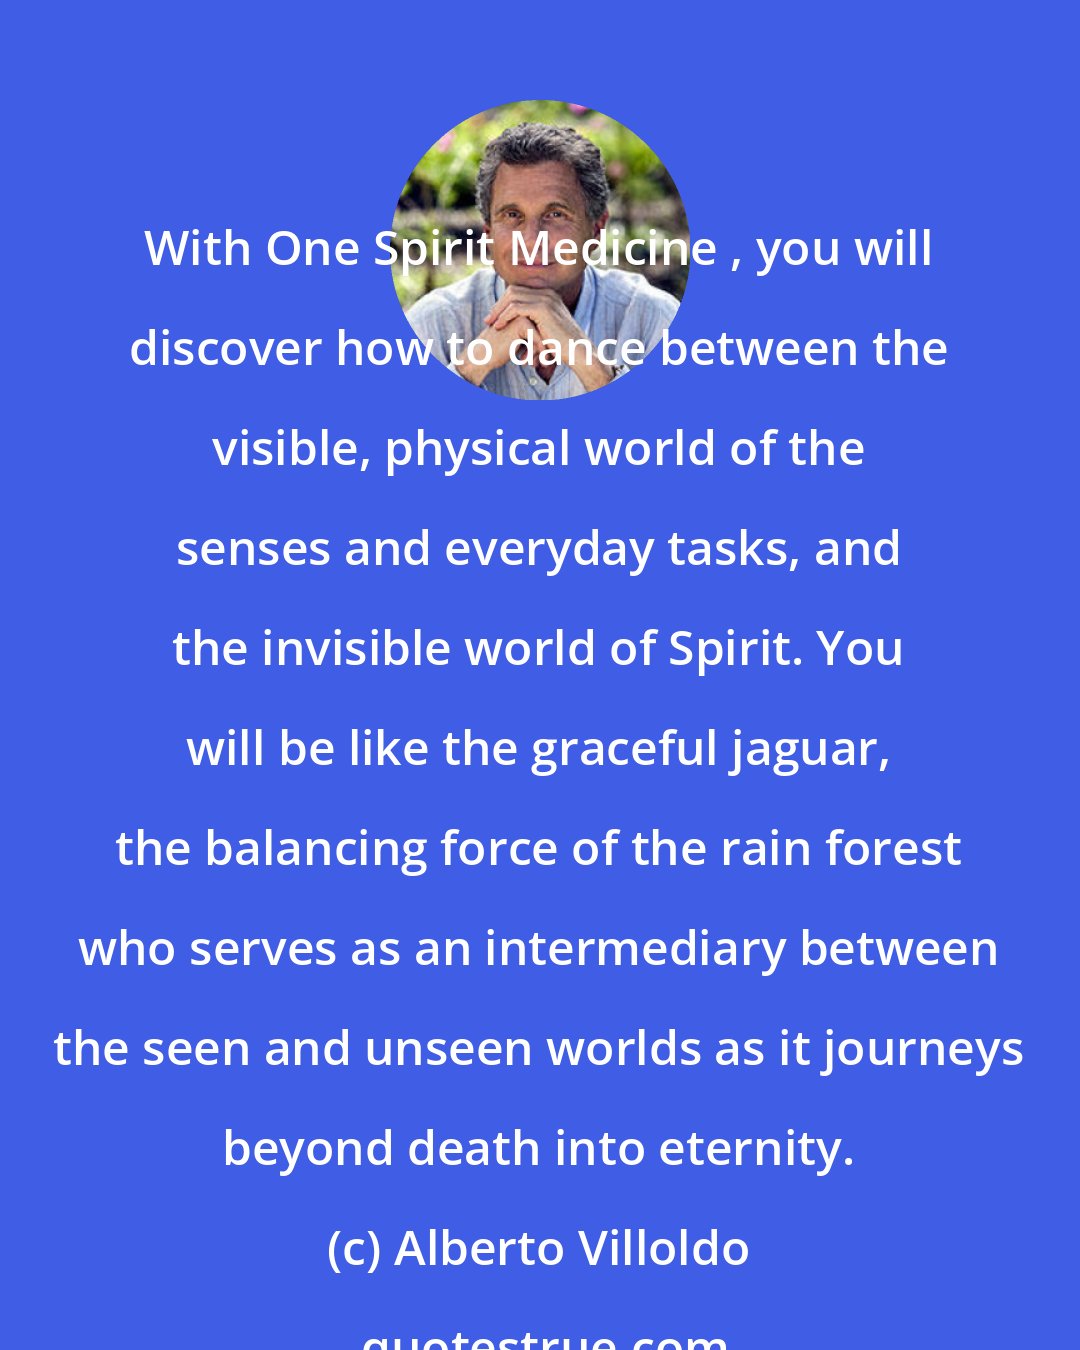 Alberto Villoldo: With One Spirit Medicine , you will discover how to dance between the visible, physical world of the senses and everyday tasks, and the invisible world of Spirit. You will be like the graceful jaguar, the balancing force of the rain forest who serves as an intermediary between the seen and unseen worlds as it journeys beyond death into eternity.